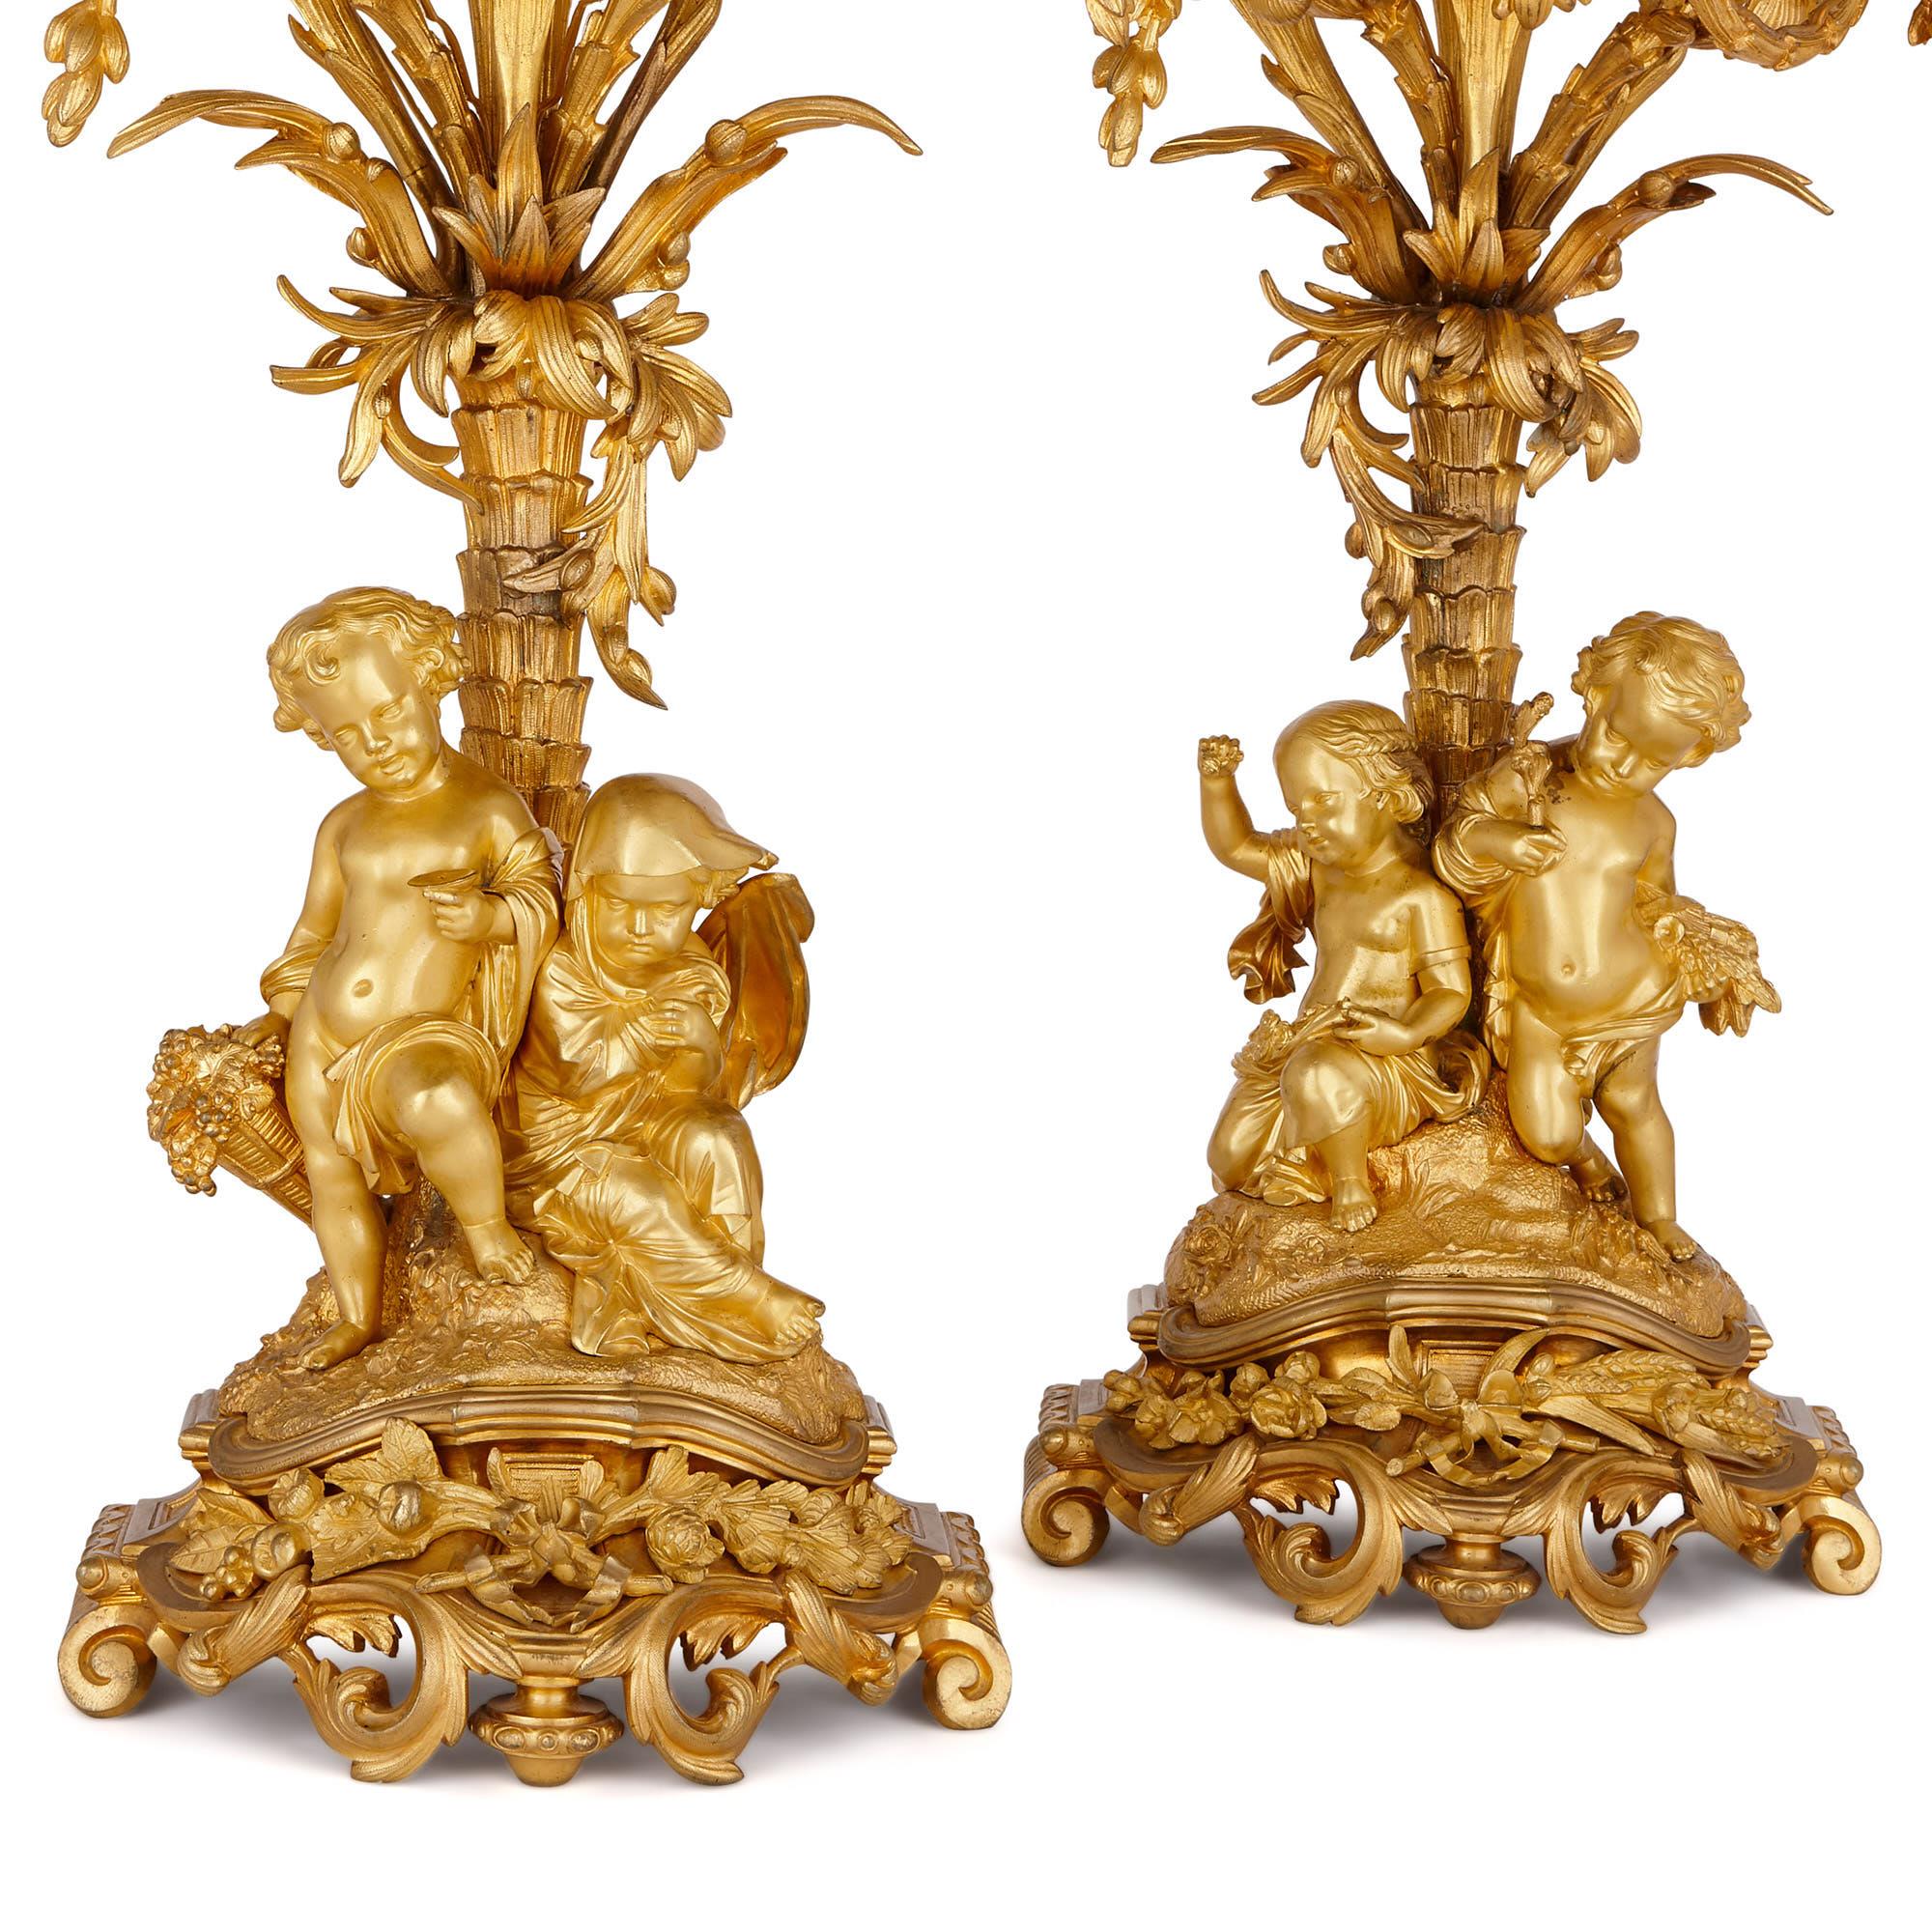 These candelabra were crafted in circa 1860 by the famous 19th century fondeur and doreur, Henri Picard. Picard’s company supplied a great deal of work for the apartments of the French Emperor Napoleon III. Several of these pieces can now be viewed